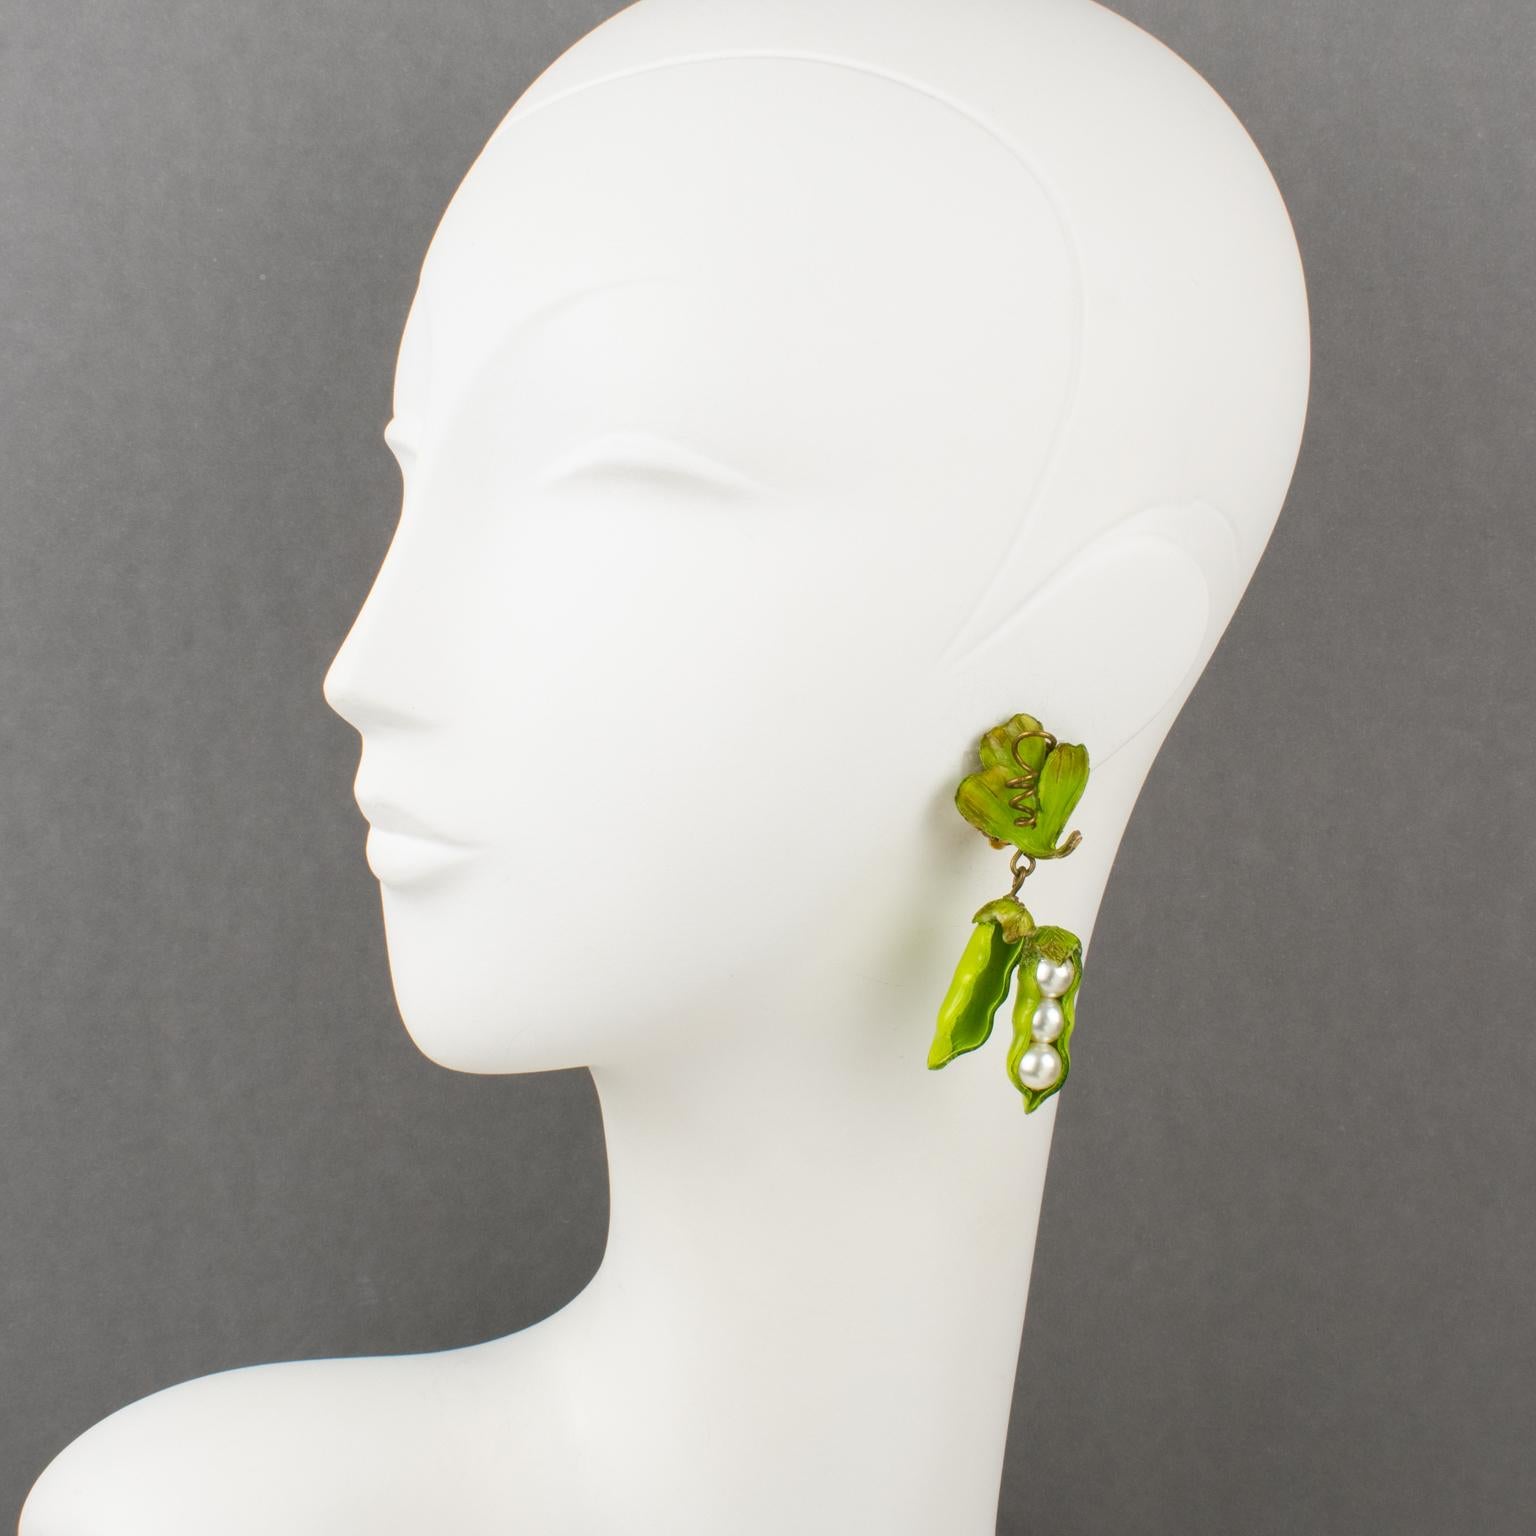 So cute French Jewelry Designer Francoise Montague Paris clip-on earrings. Dangle shape, in resin featuring dimensional green pea with pea pods and leaves in fresh green color. The peas are in pearl-imitation beads. No visible signature like all the